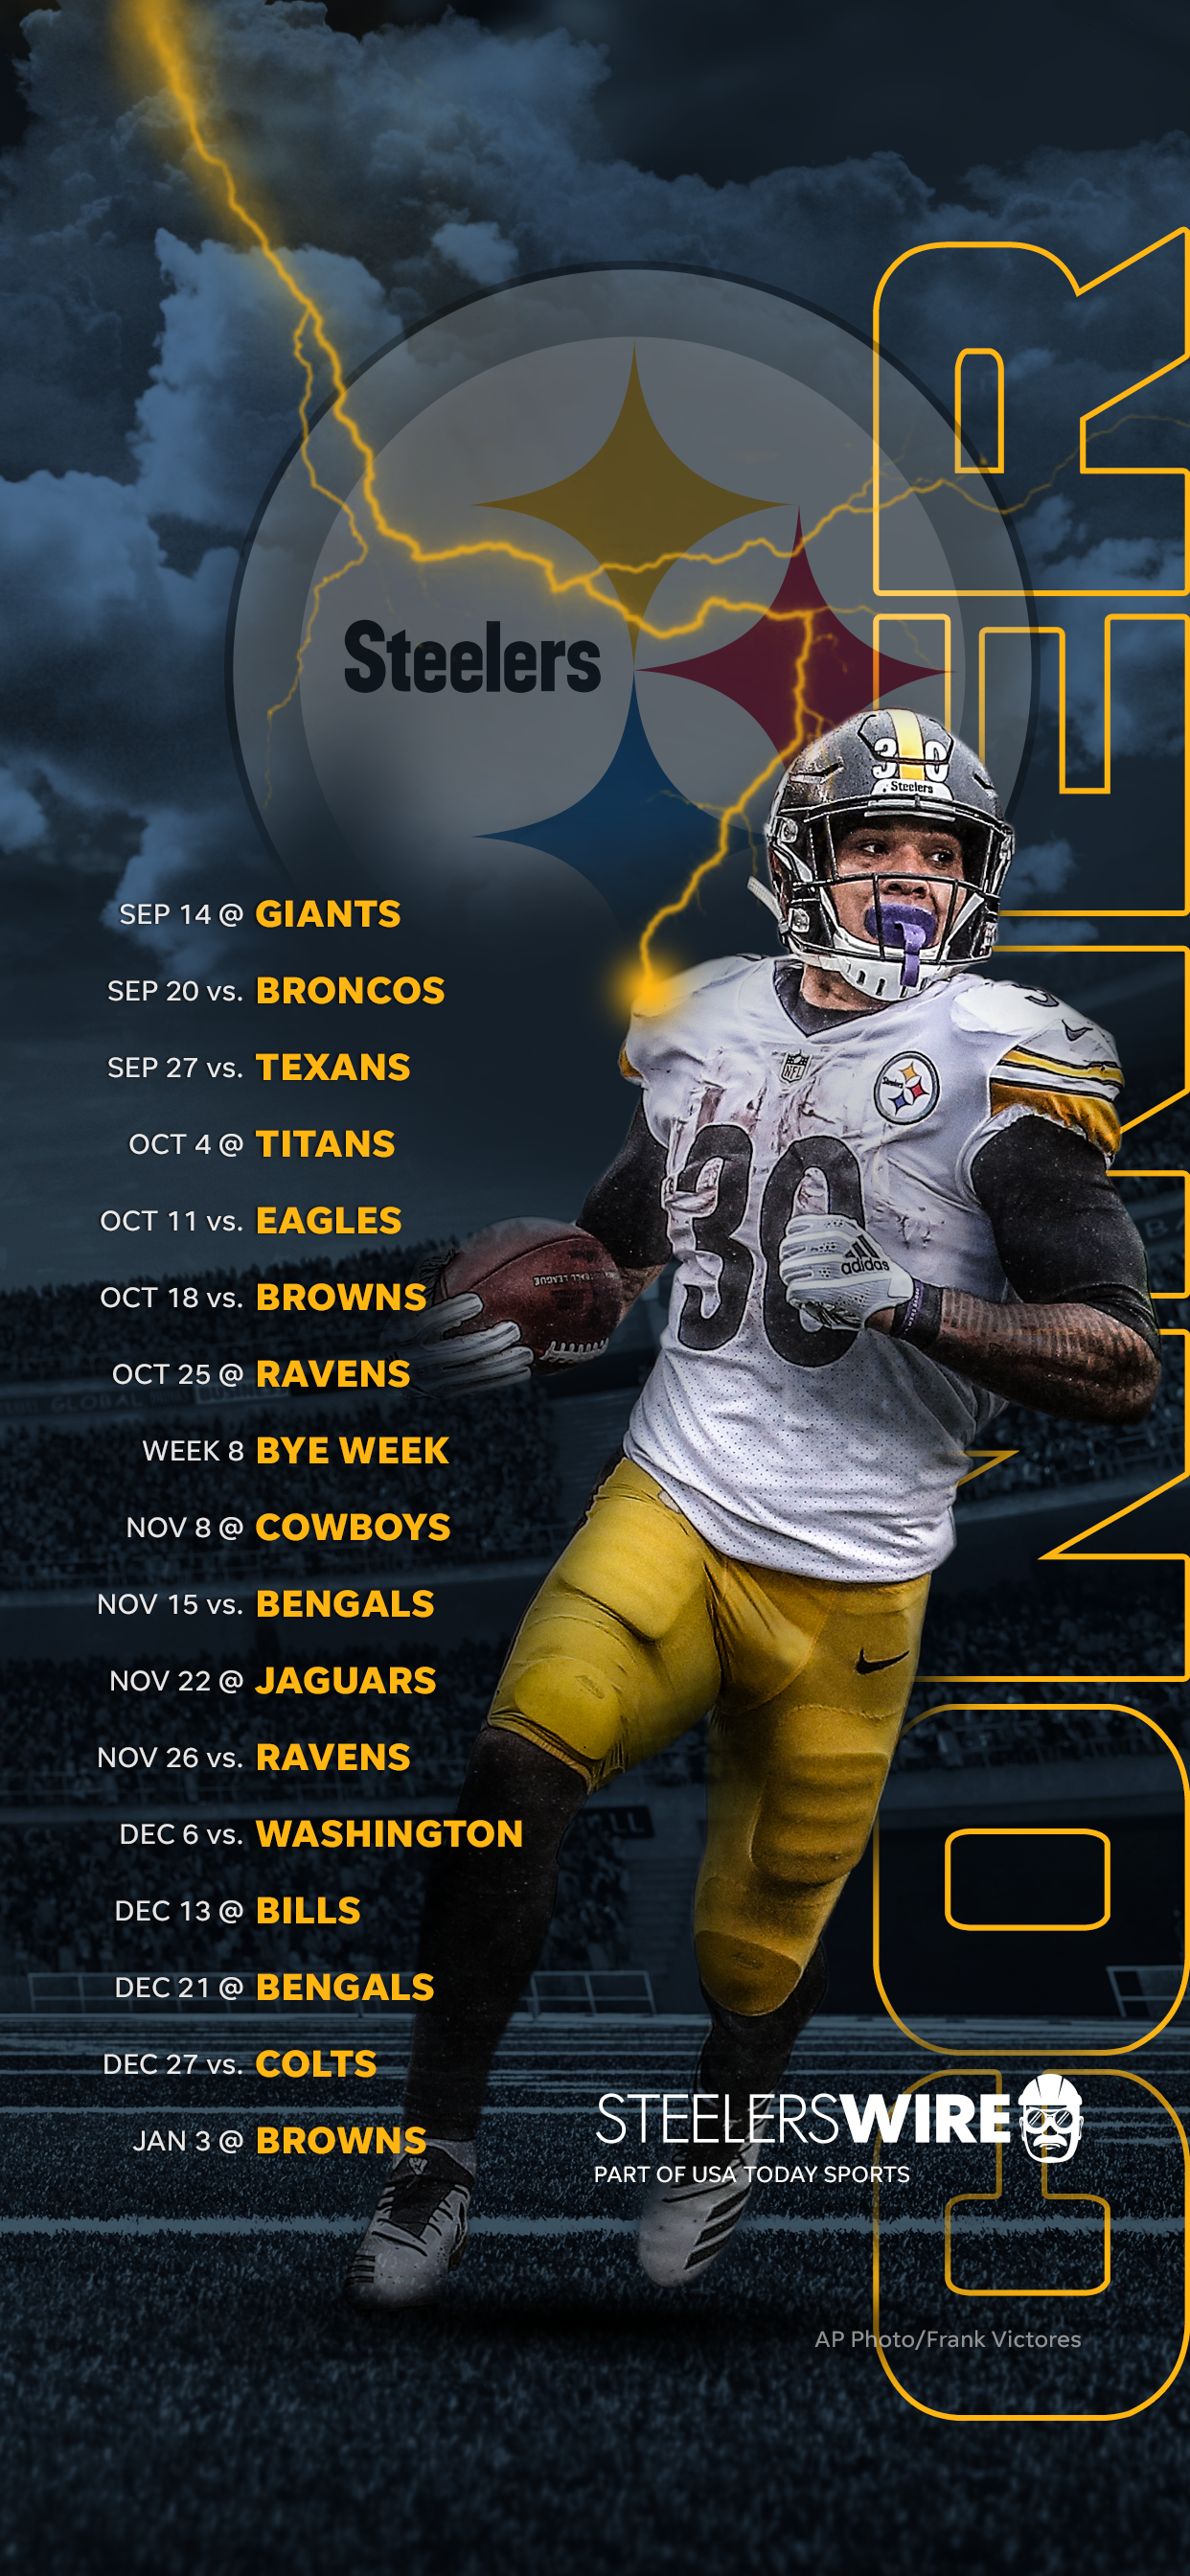 Steelers Wallpaper : View and download for free this steelers wallpaper